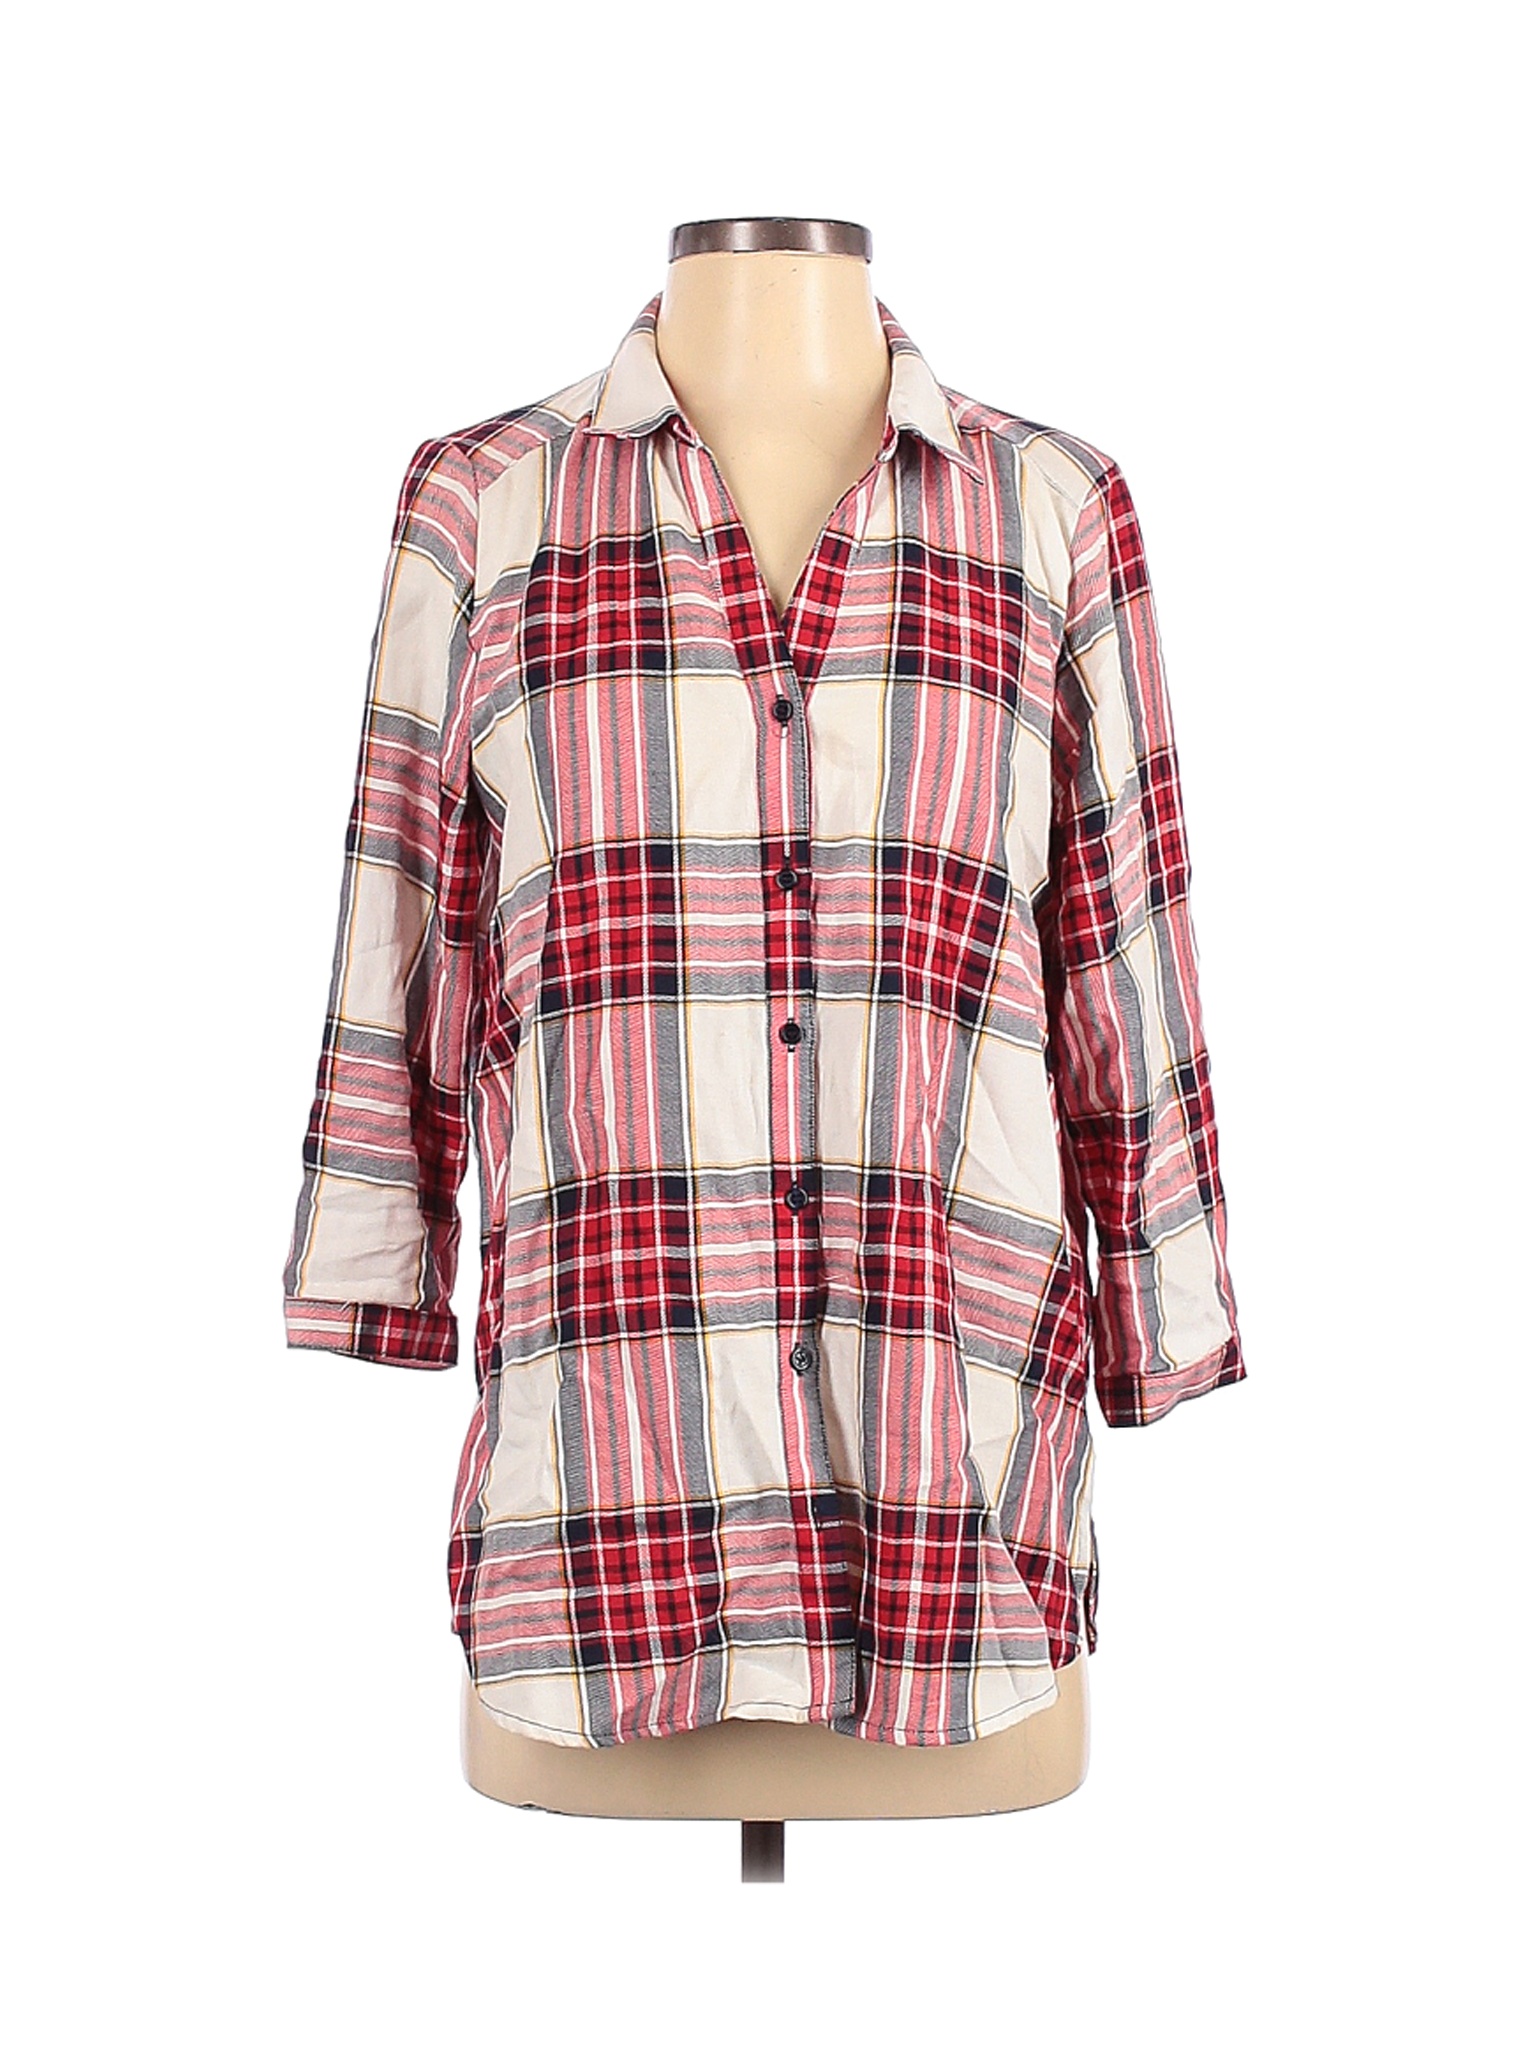 red short sleeve button down